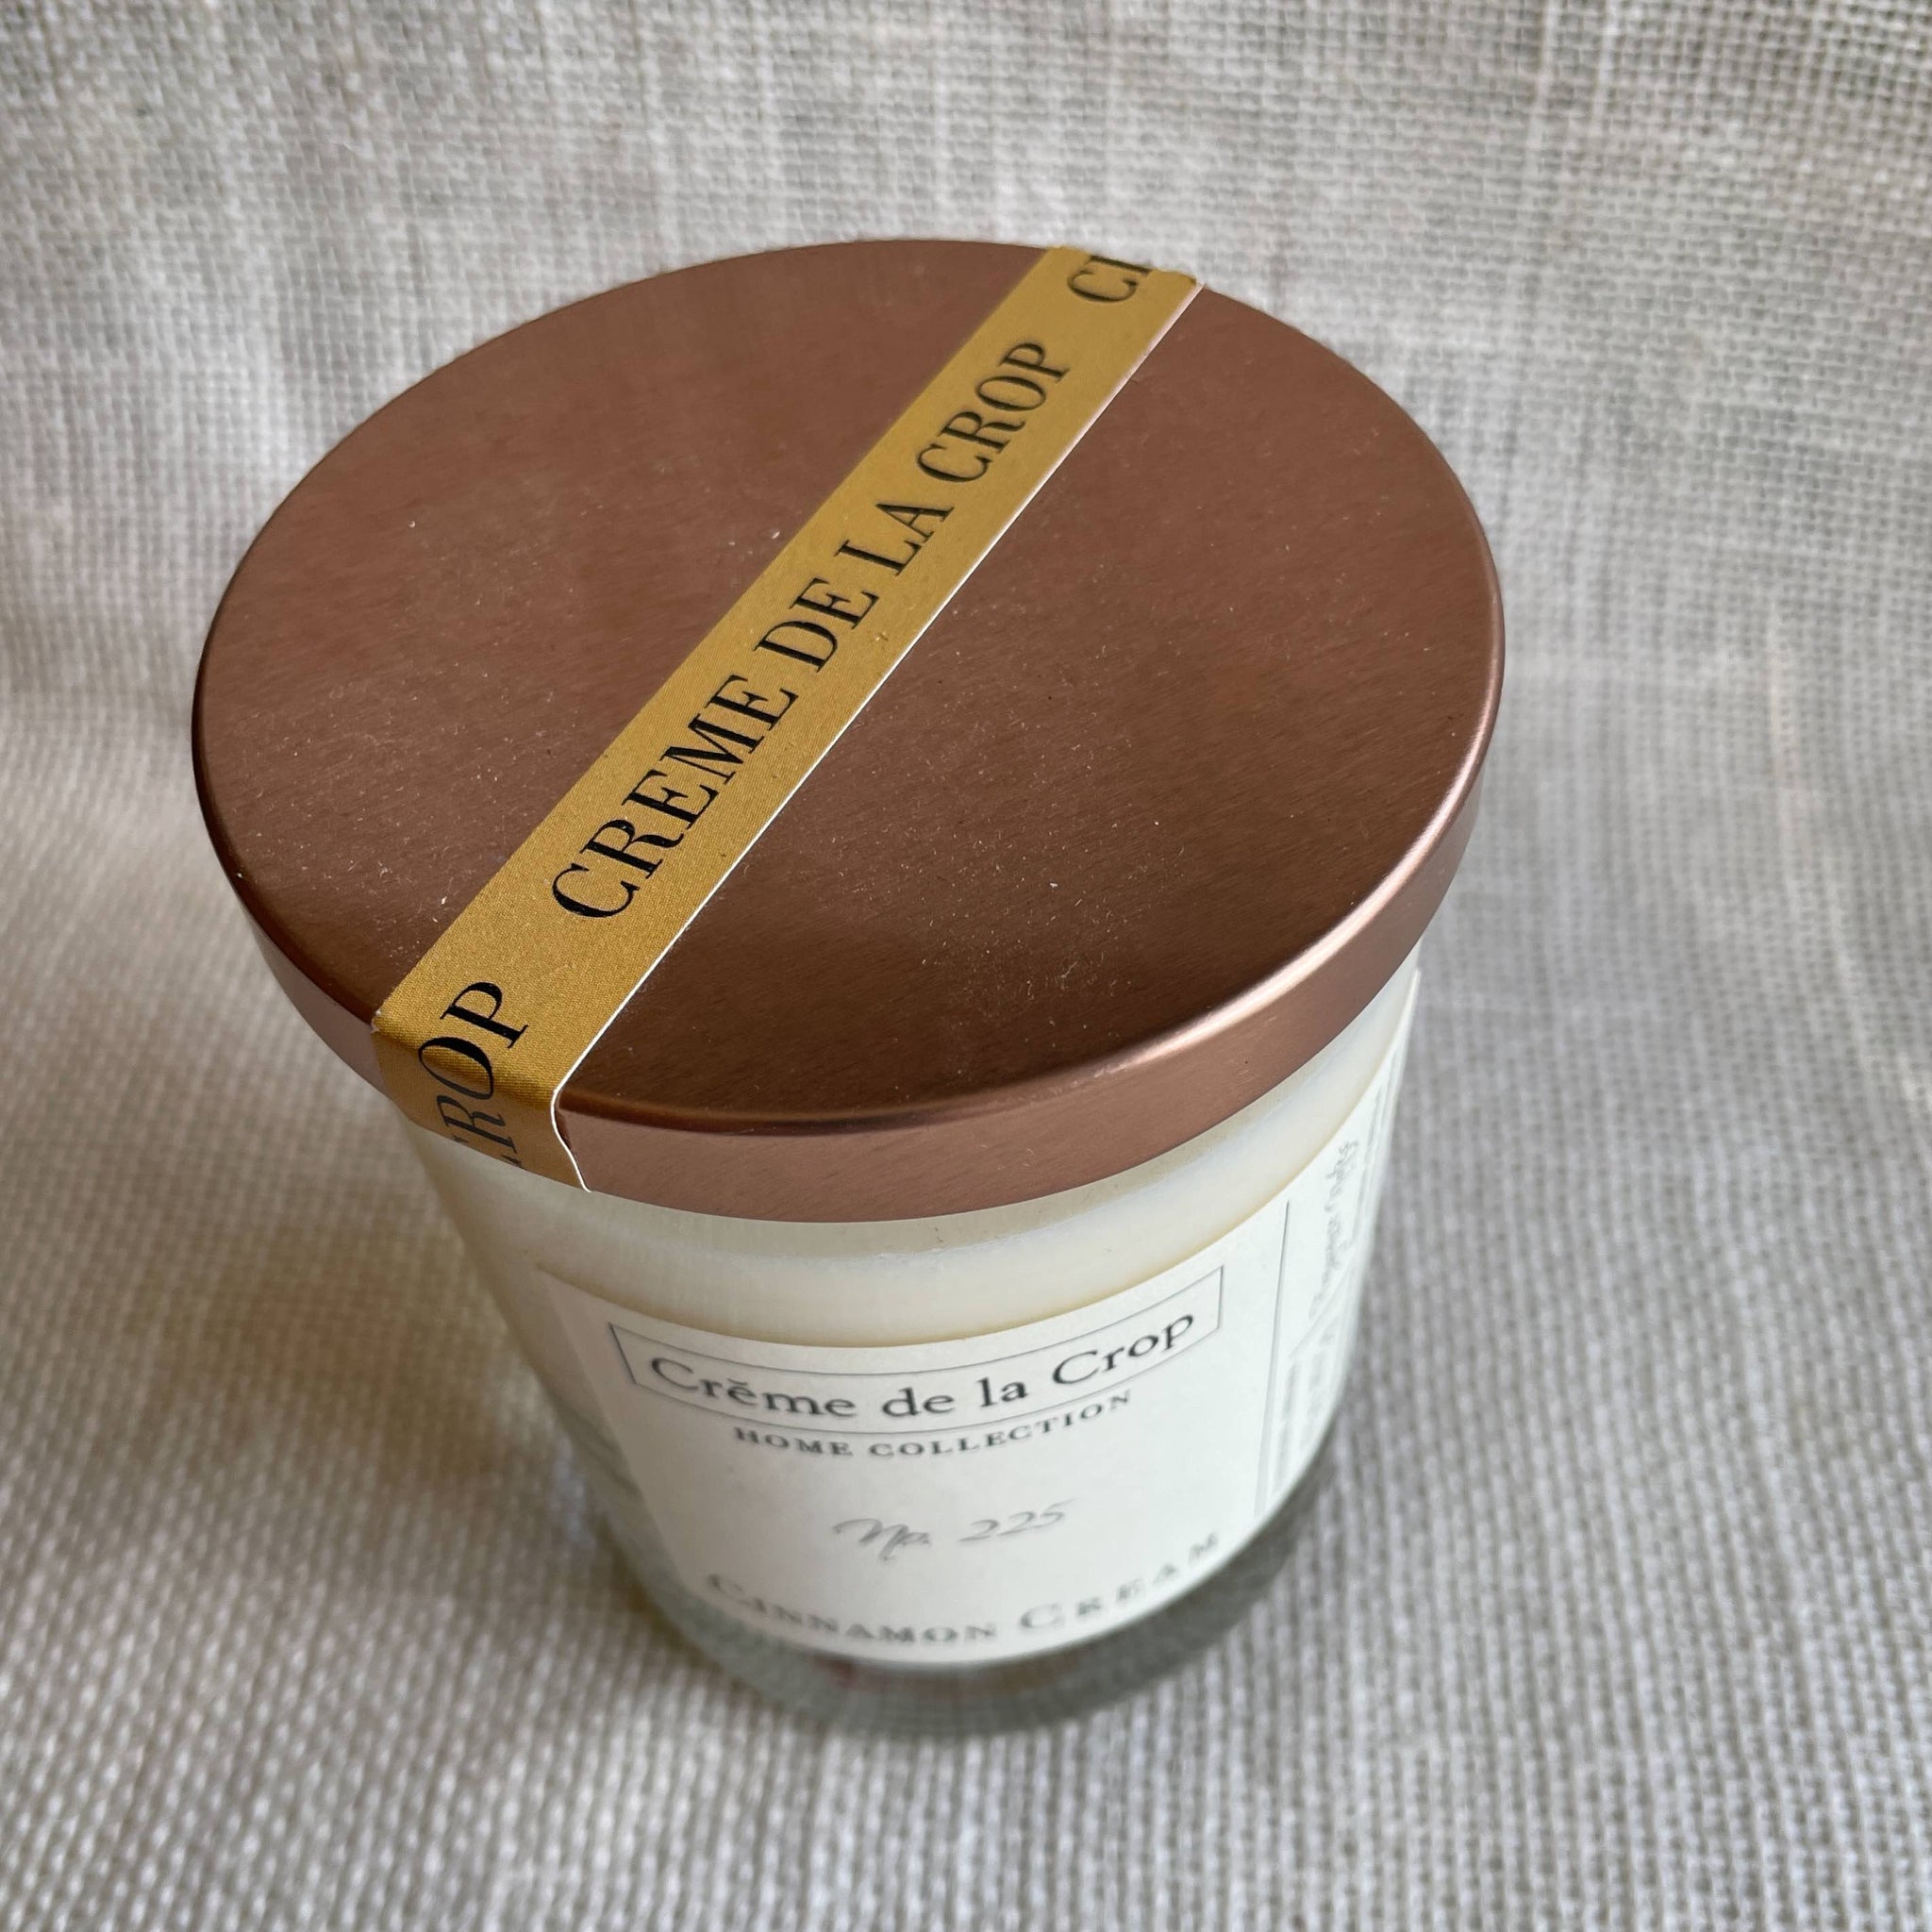 100% Soy Wax, Hand-Poured Candle  Fragrance Note:  Peppermint, Vanilla, Chocolate, Coconut  Our Alpine Snowfall candle is inspired by the mountains of Switzerland top